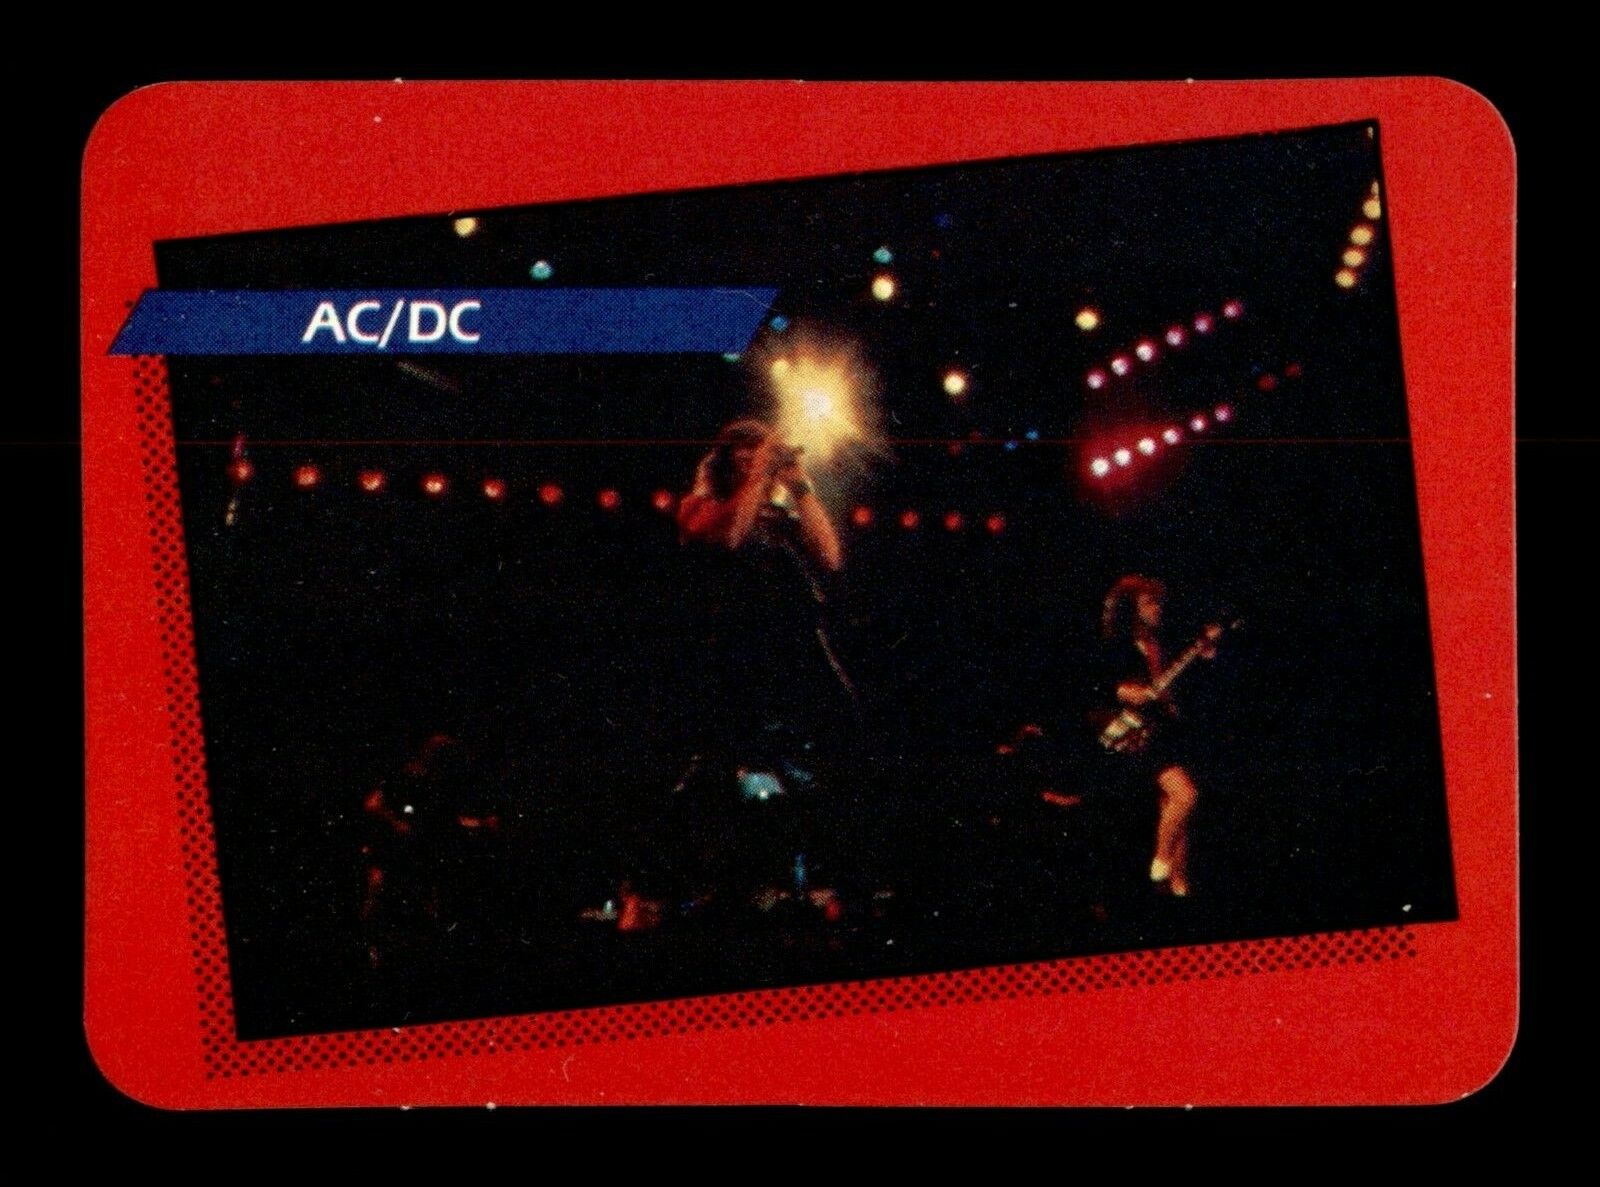 1985 AGI INC. ROCK STAR CONCERT CARDS AND STICKERS SEE DROP DOWN MENU